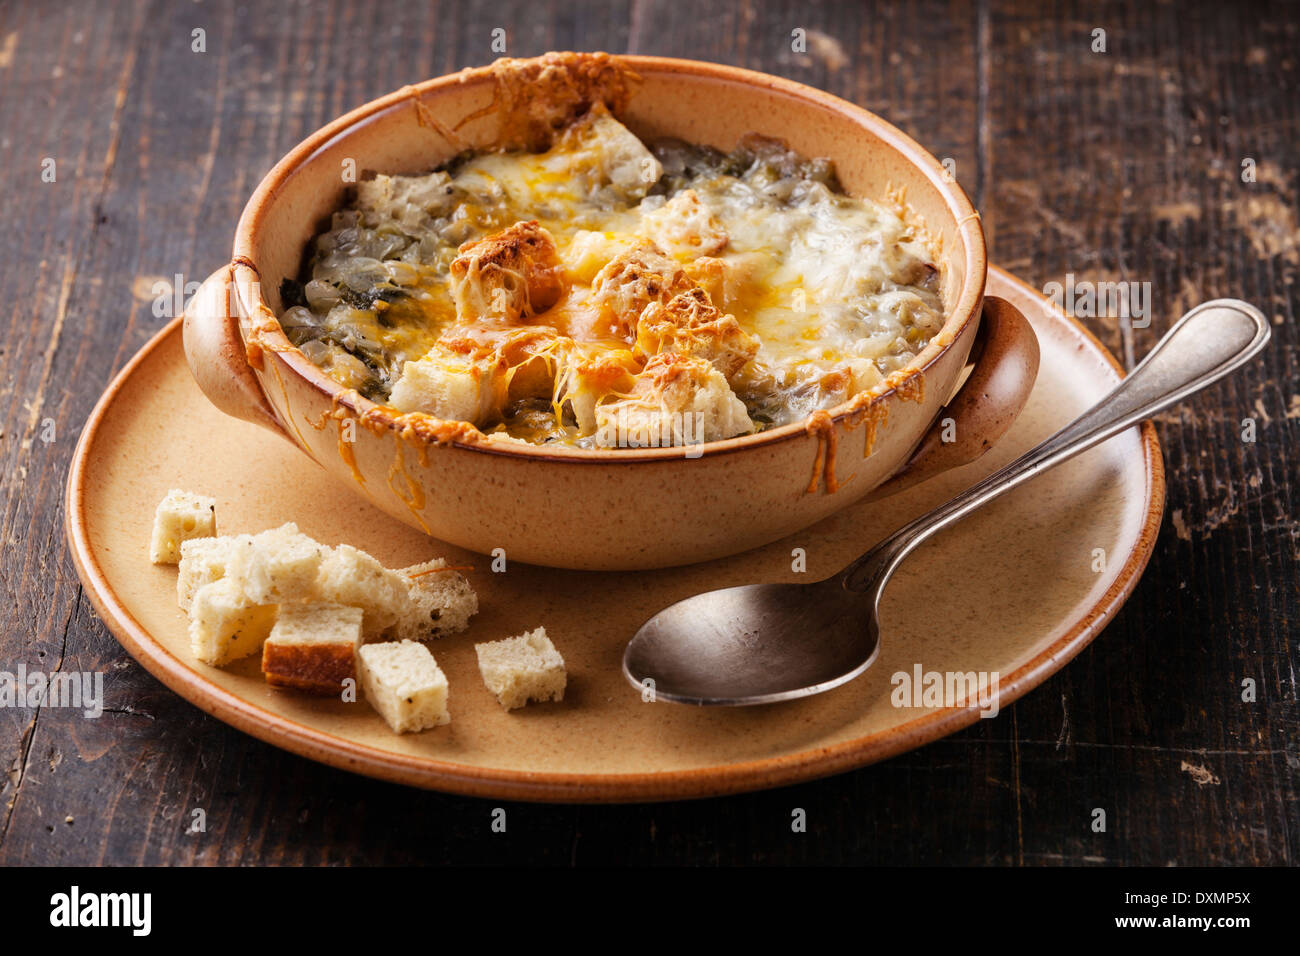 Onion soup with croutons and cheddar cheese Stock Photo